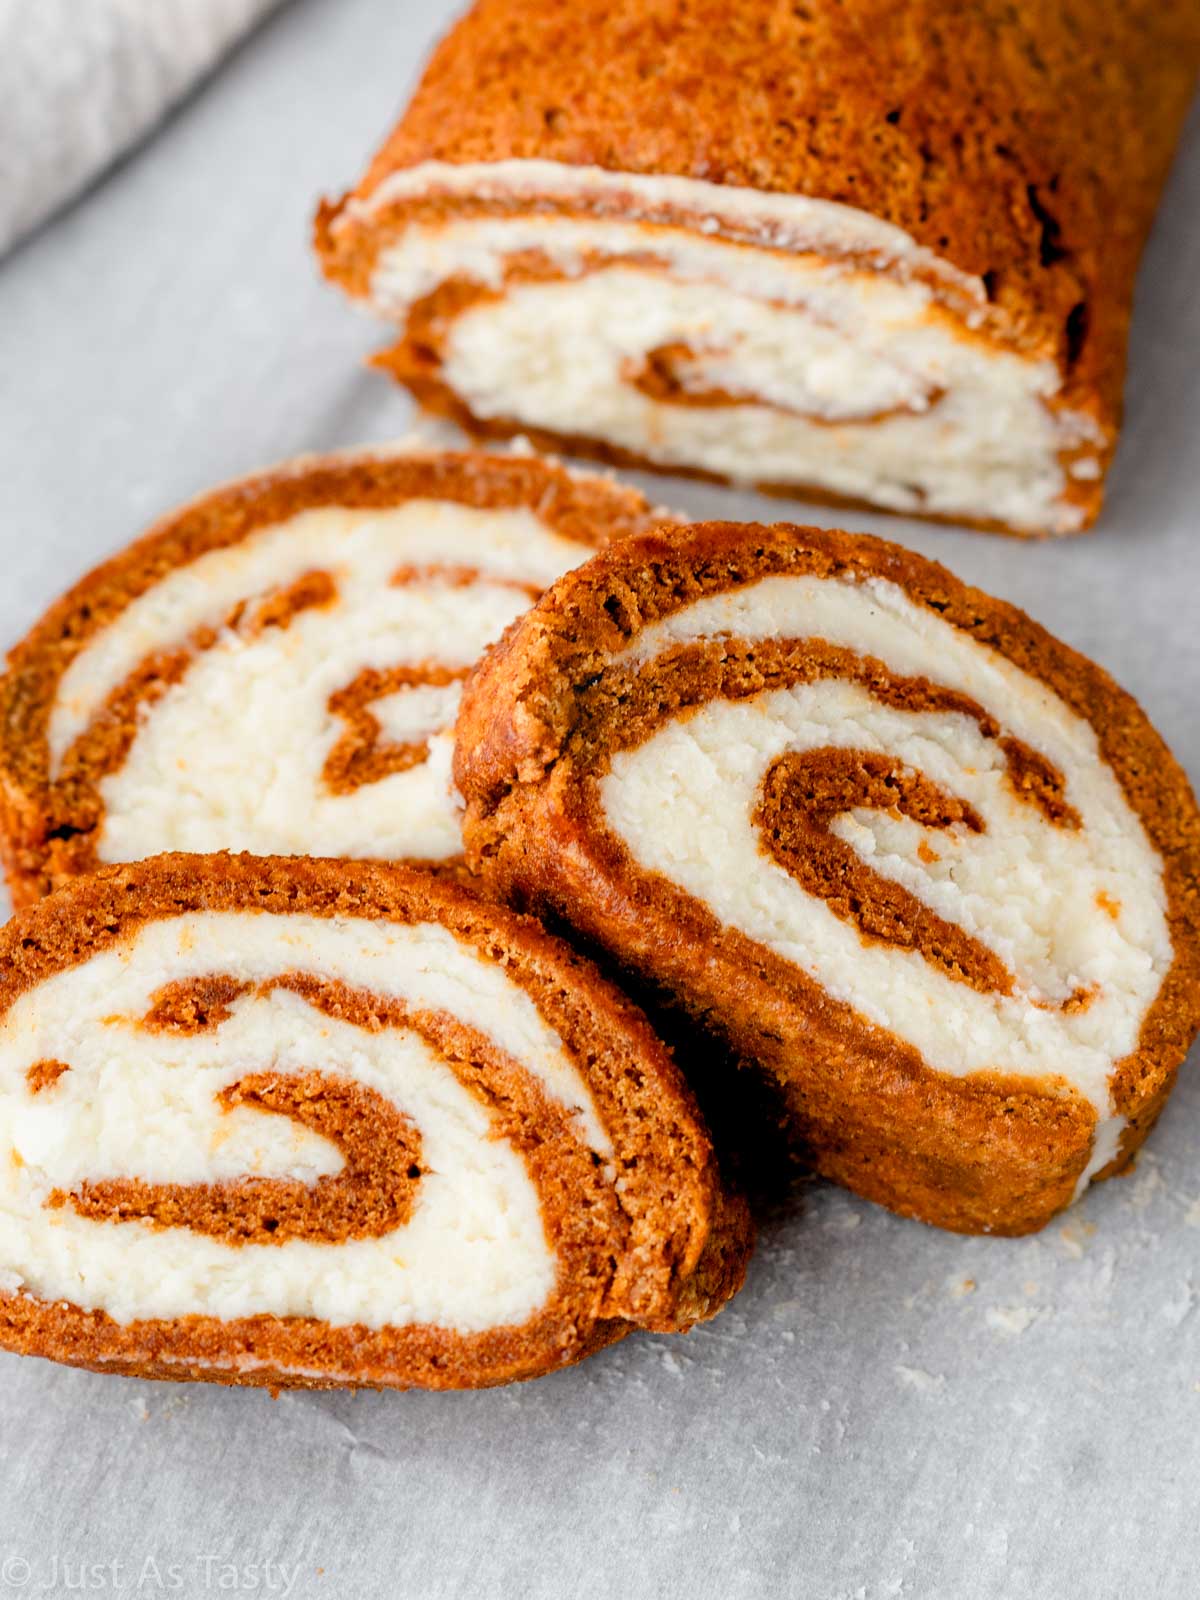 Three slices of pumpkin roll with cream cheese swirl filling.